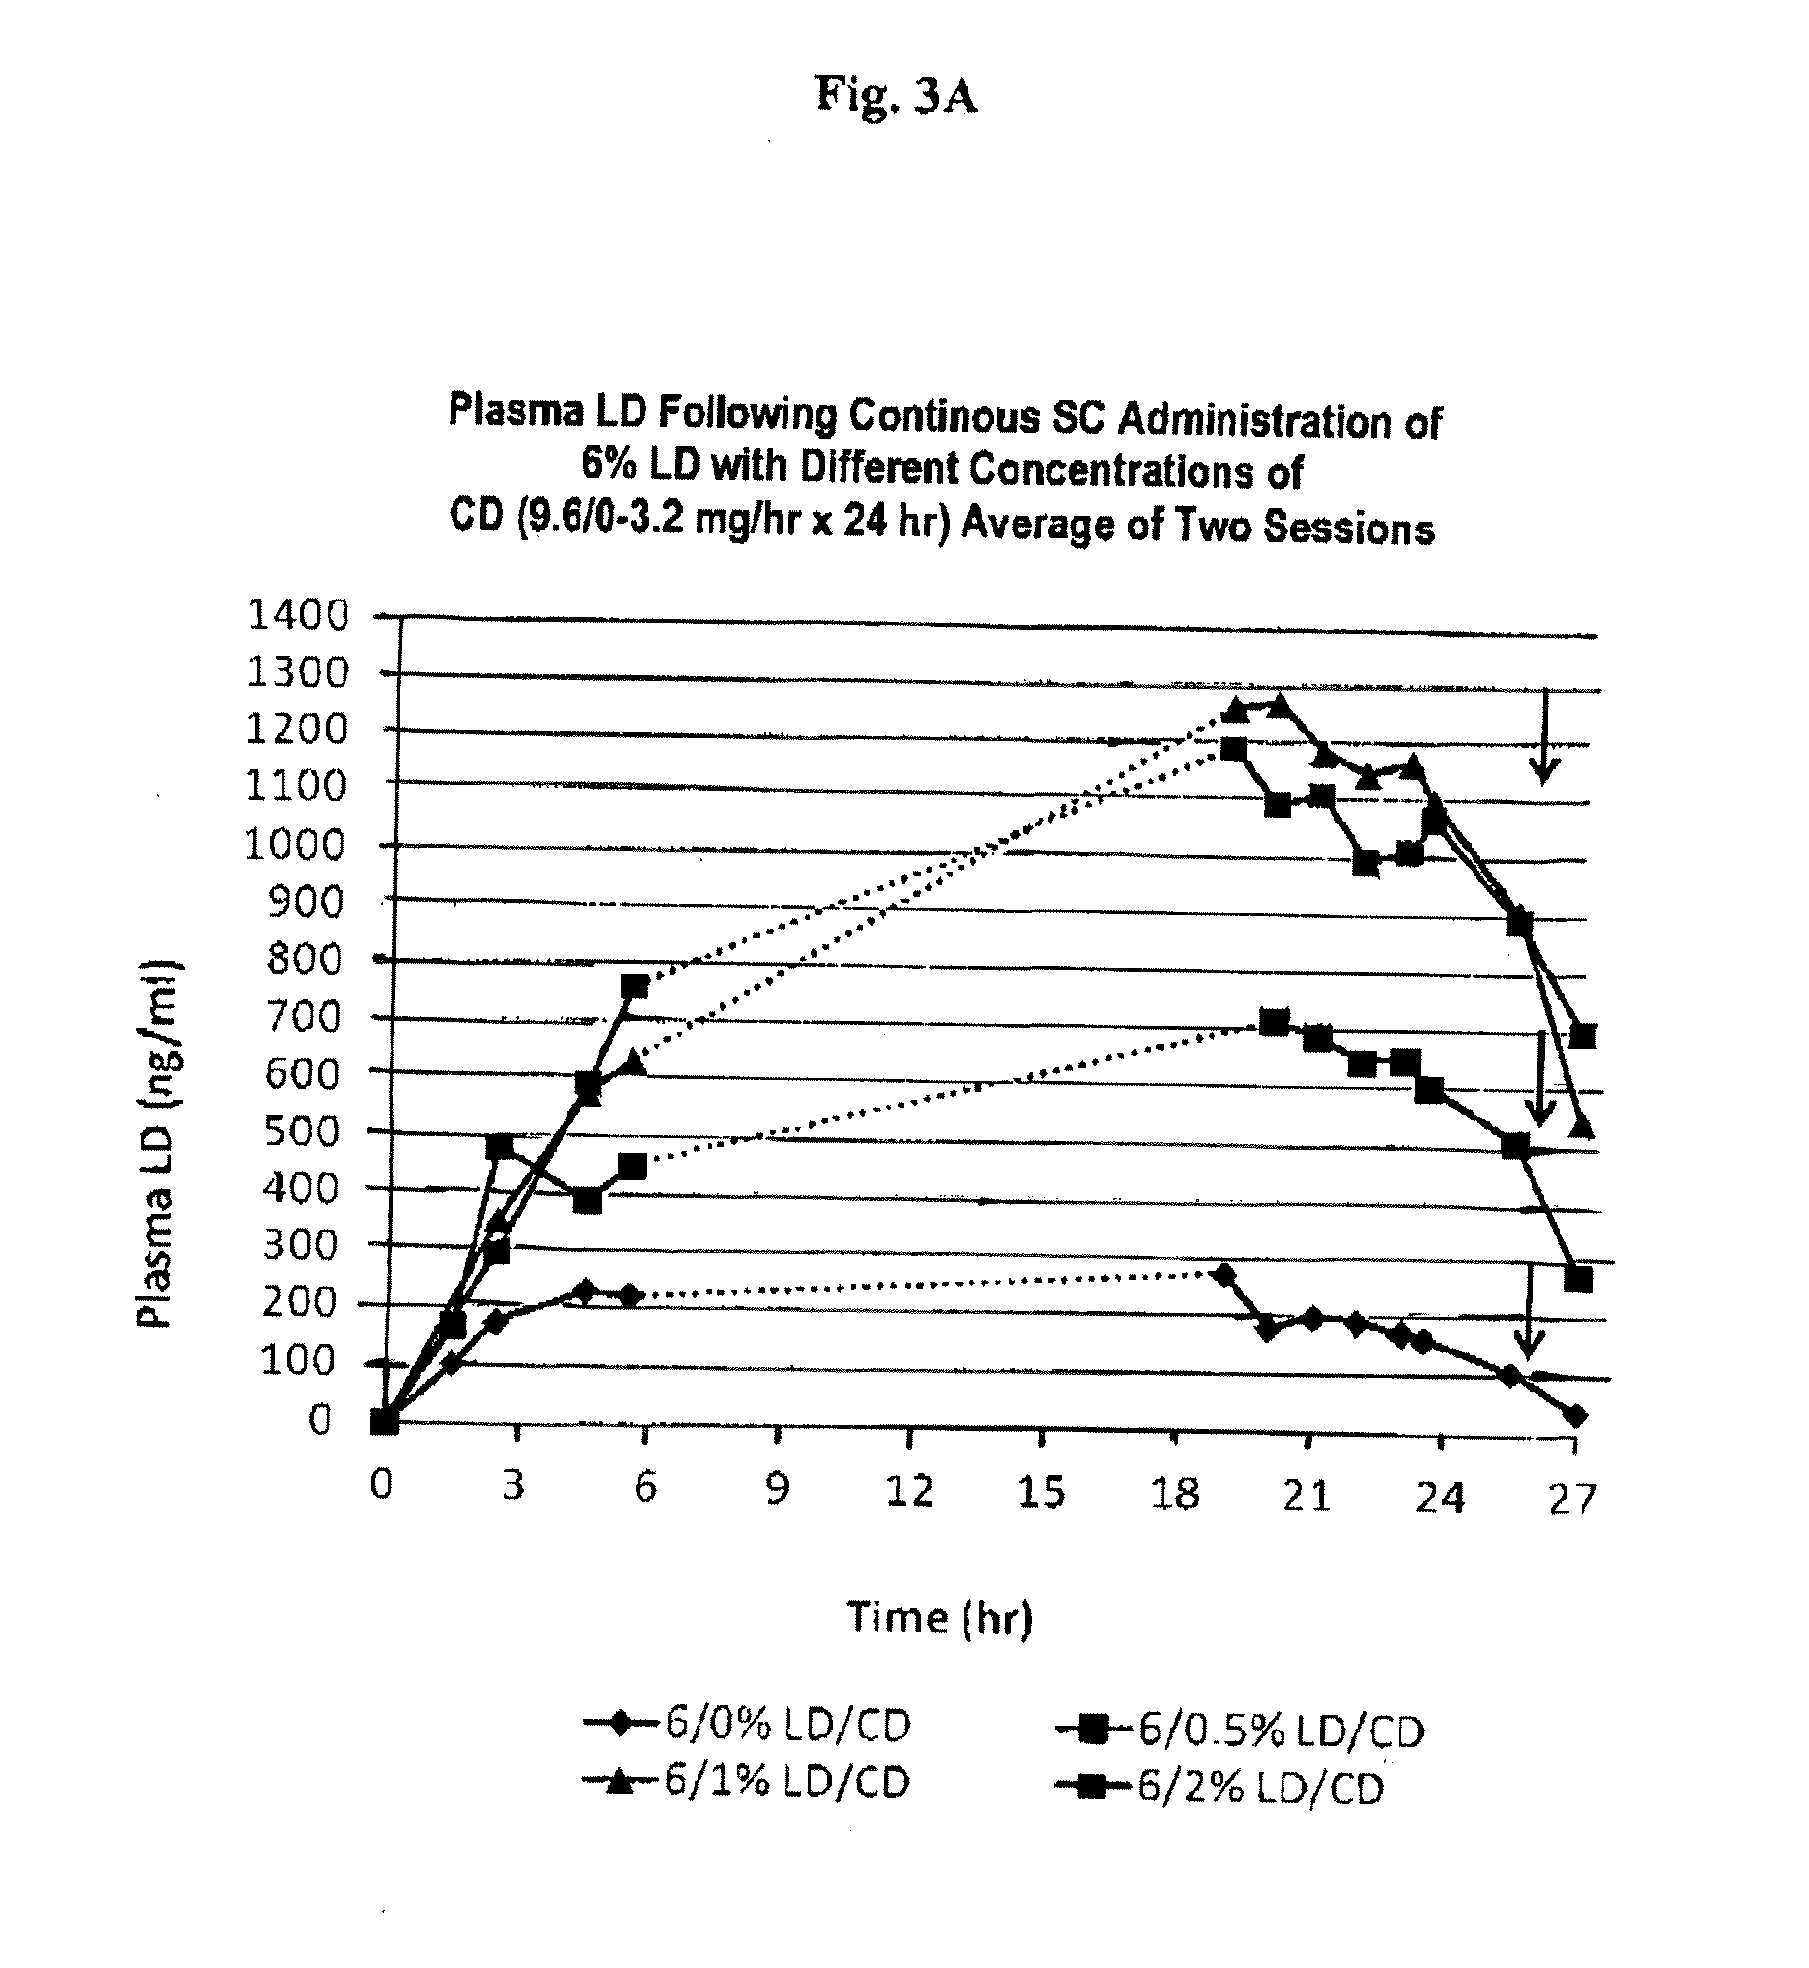 Continuous administration of l-dopa, dopa decarboxylase inhibitors, catechol-o-methyl transferase inhibitors and compositions for same